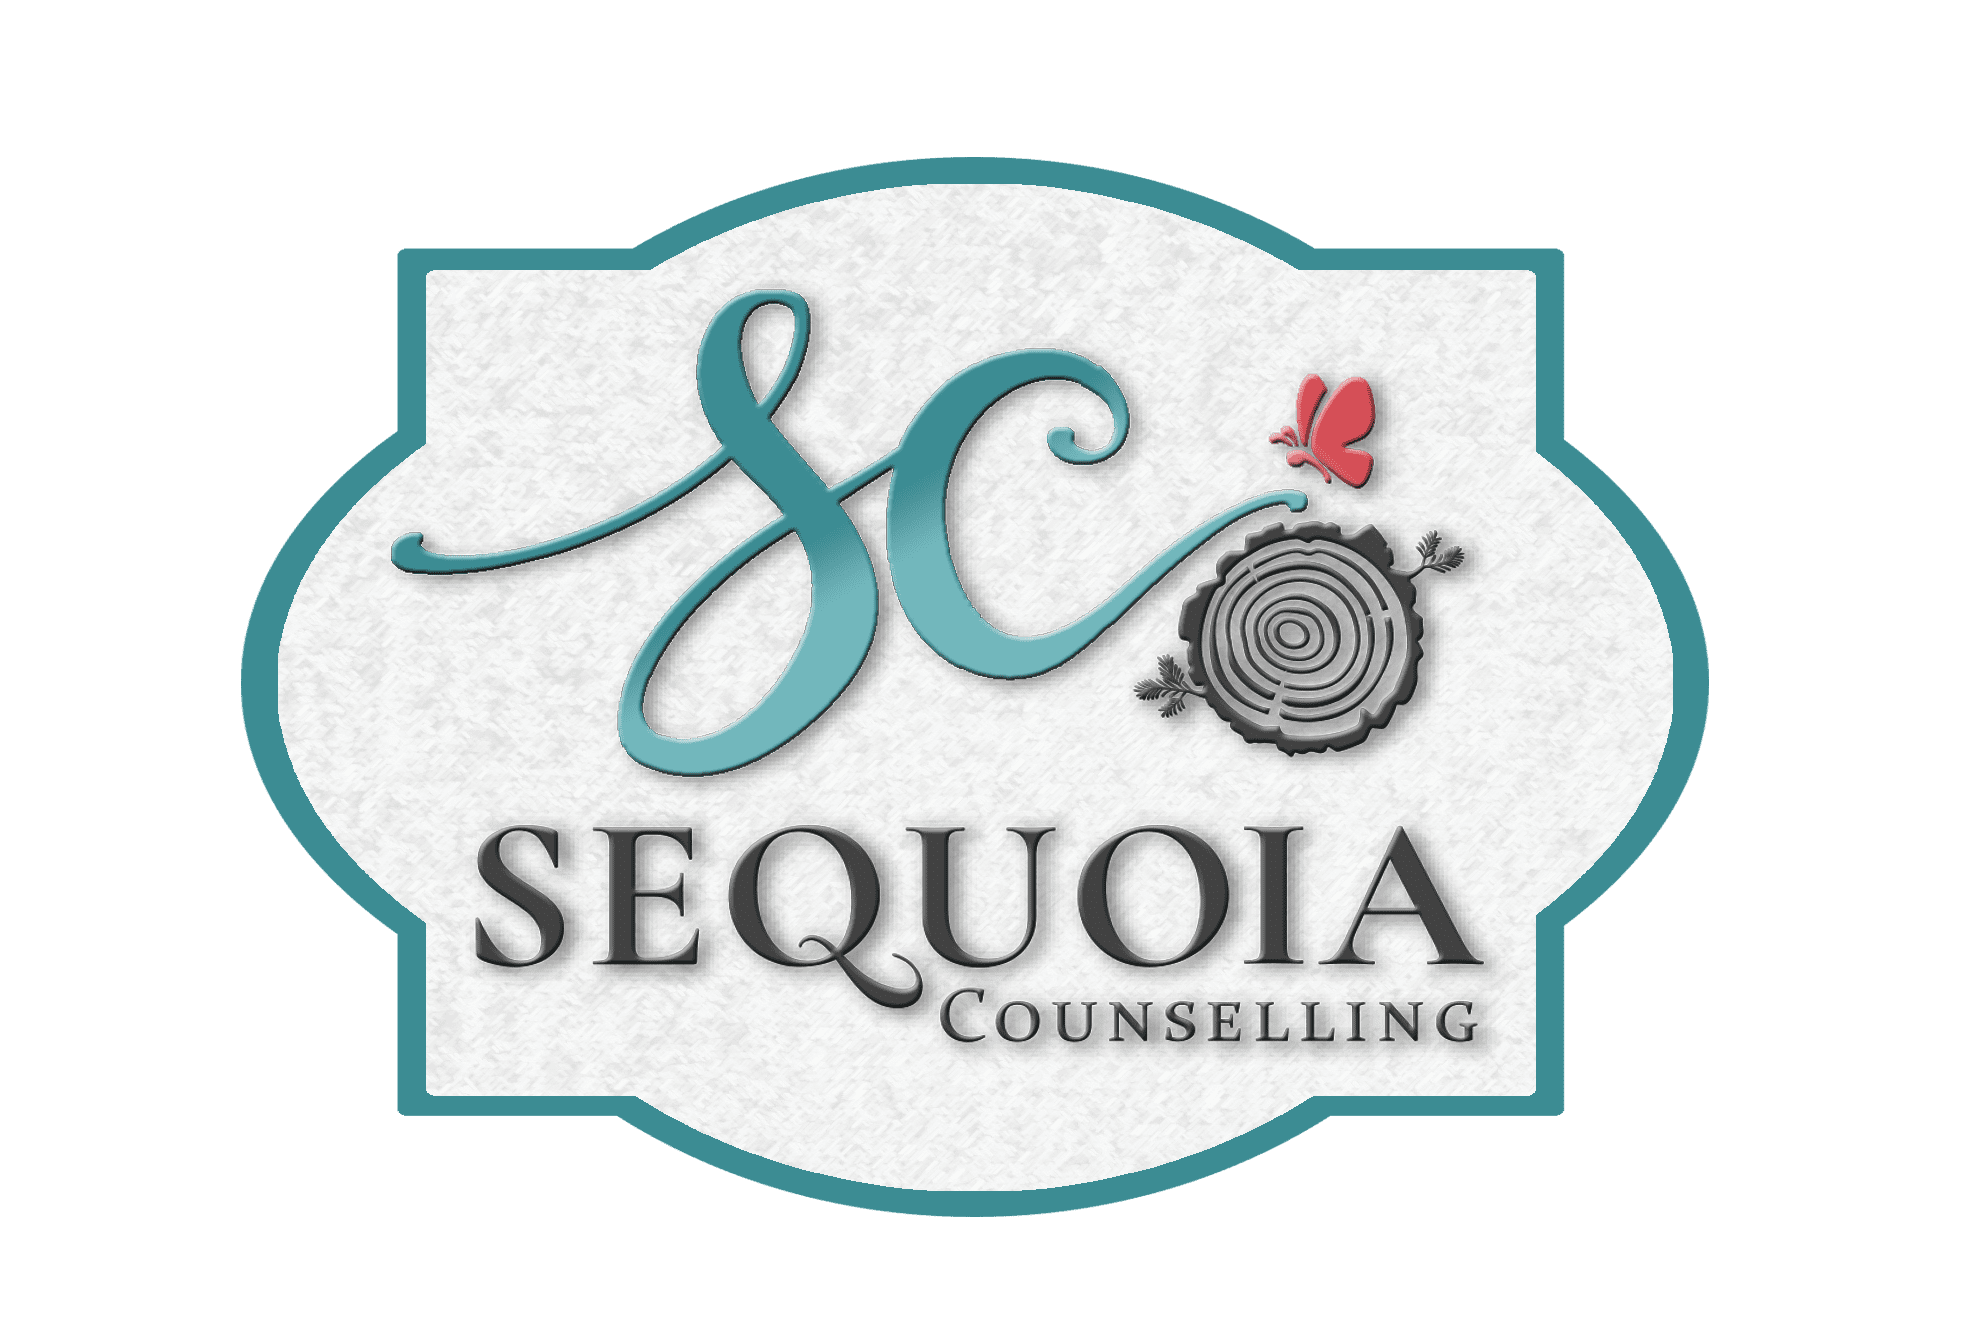 Sequoia Counselling